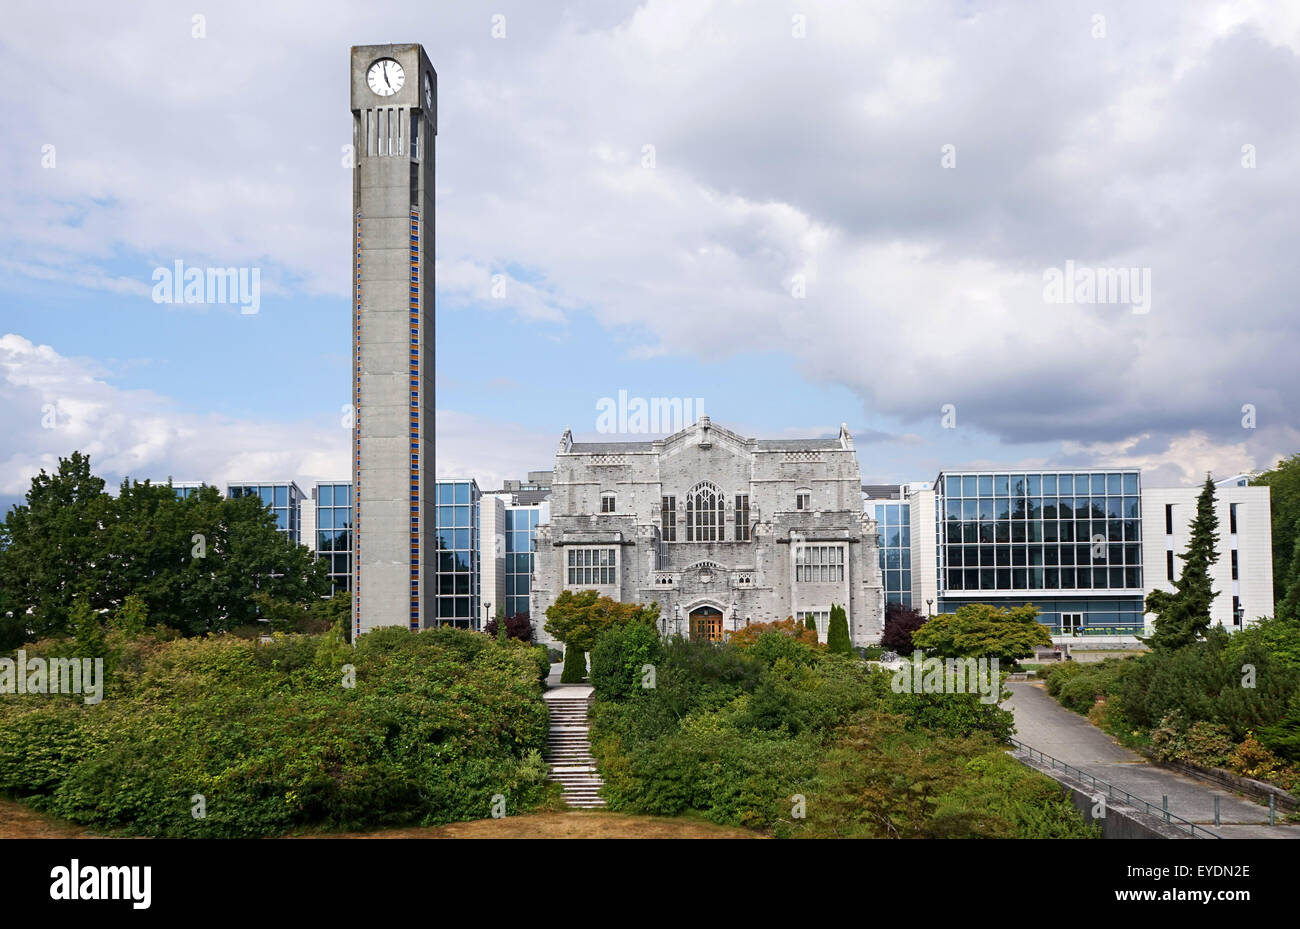 University of British Columbia central campus in Vancouver with Ladner Clock Tower Stock Photo